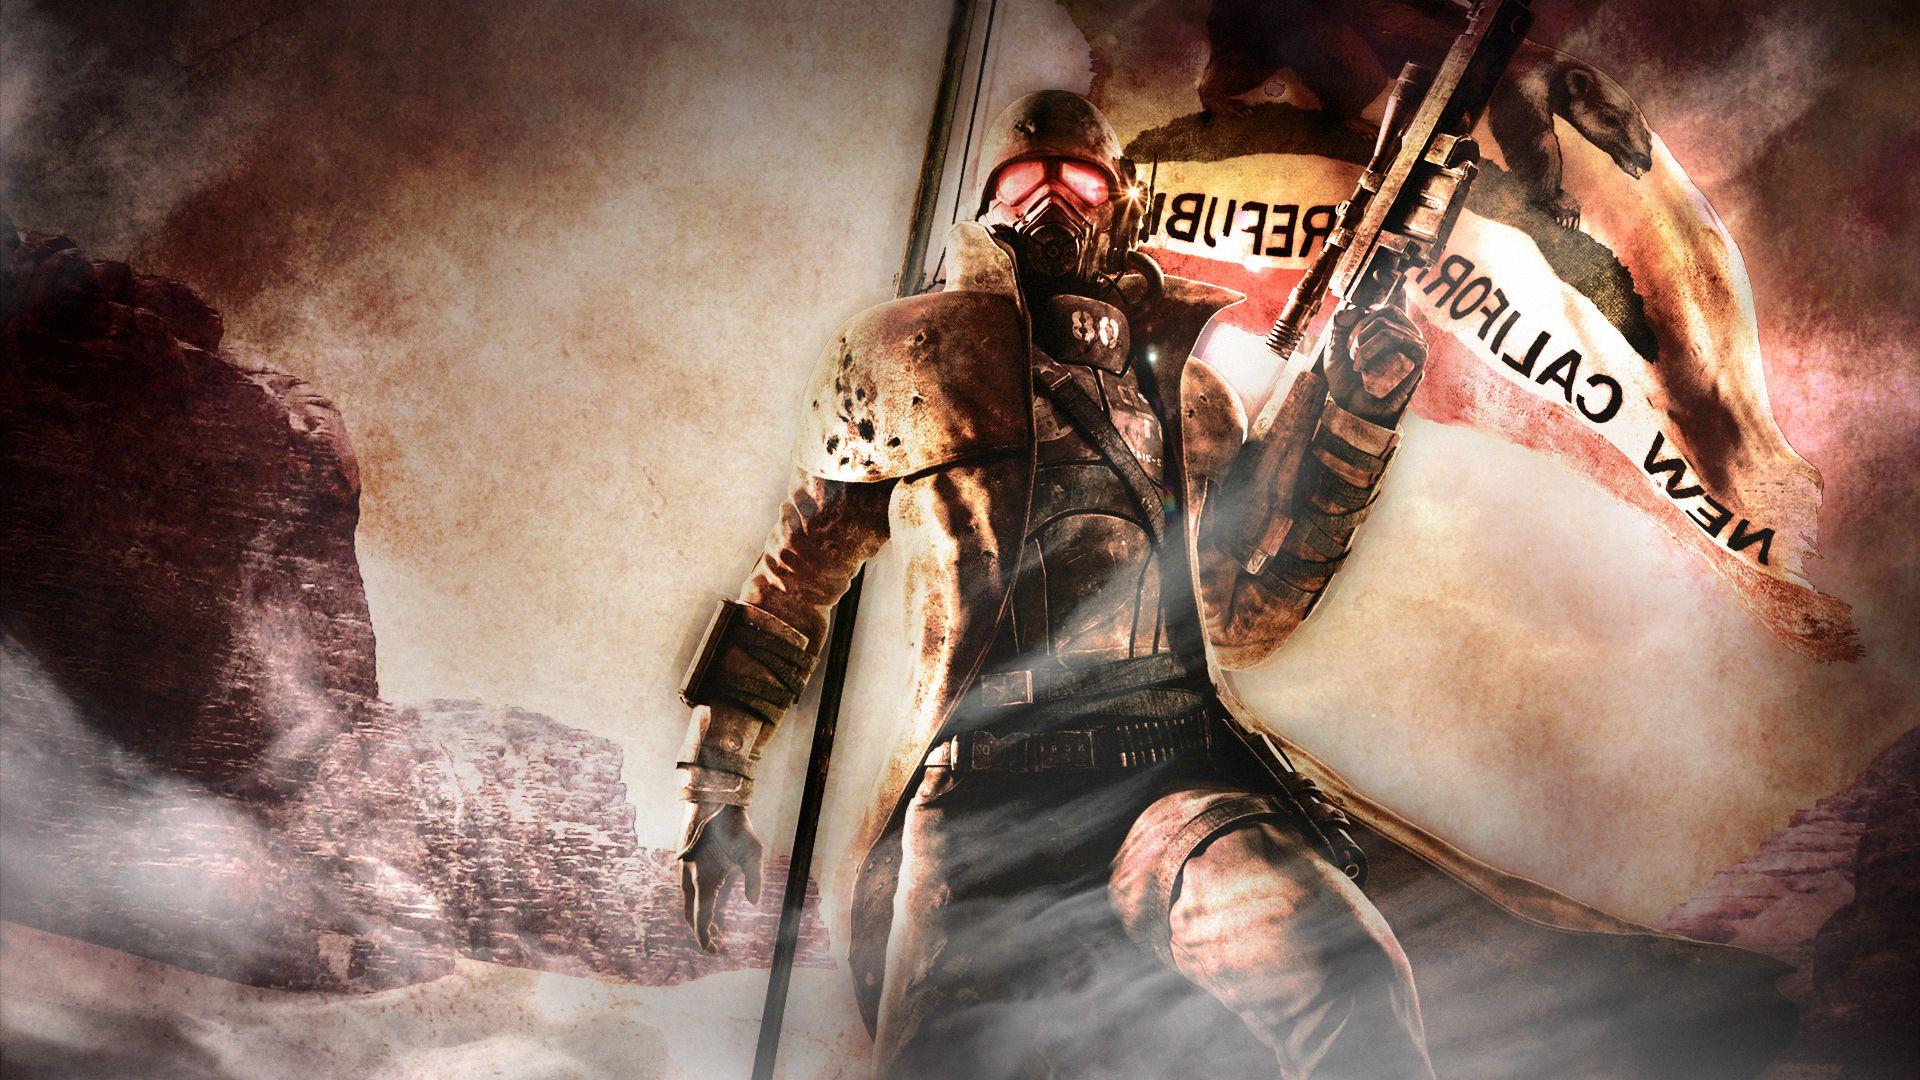 Download Fallout New Vegas HD Wallpaper for Free, BsnSCB Graphics